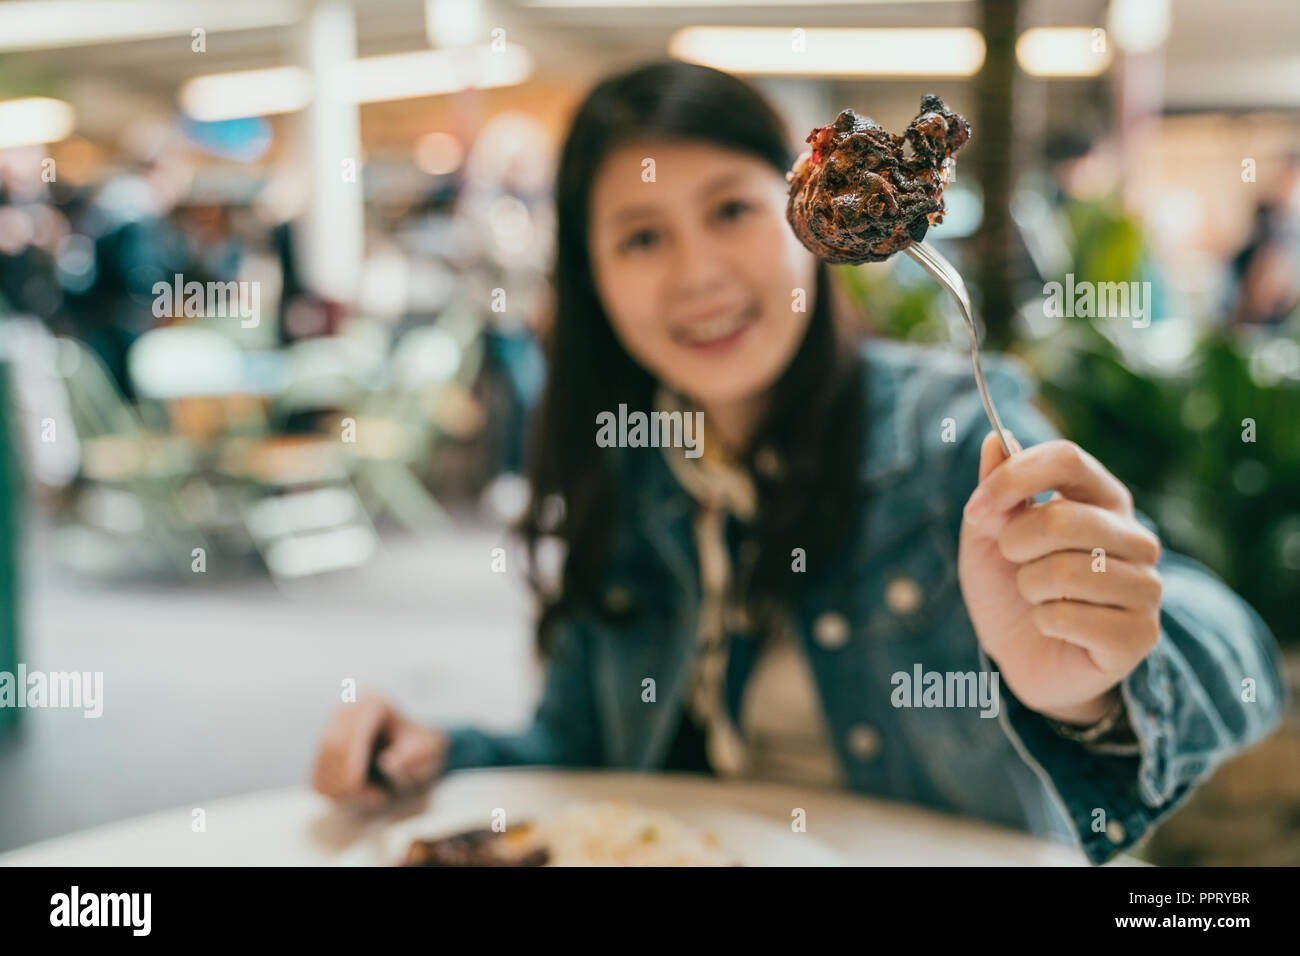 pretty woman using fork to show her delicious food, she is giving the camera a big attractive smile Stock Photo